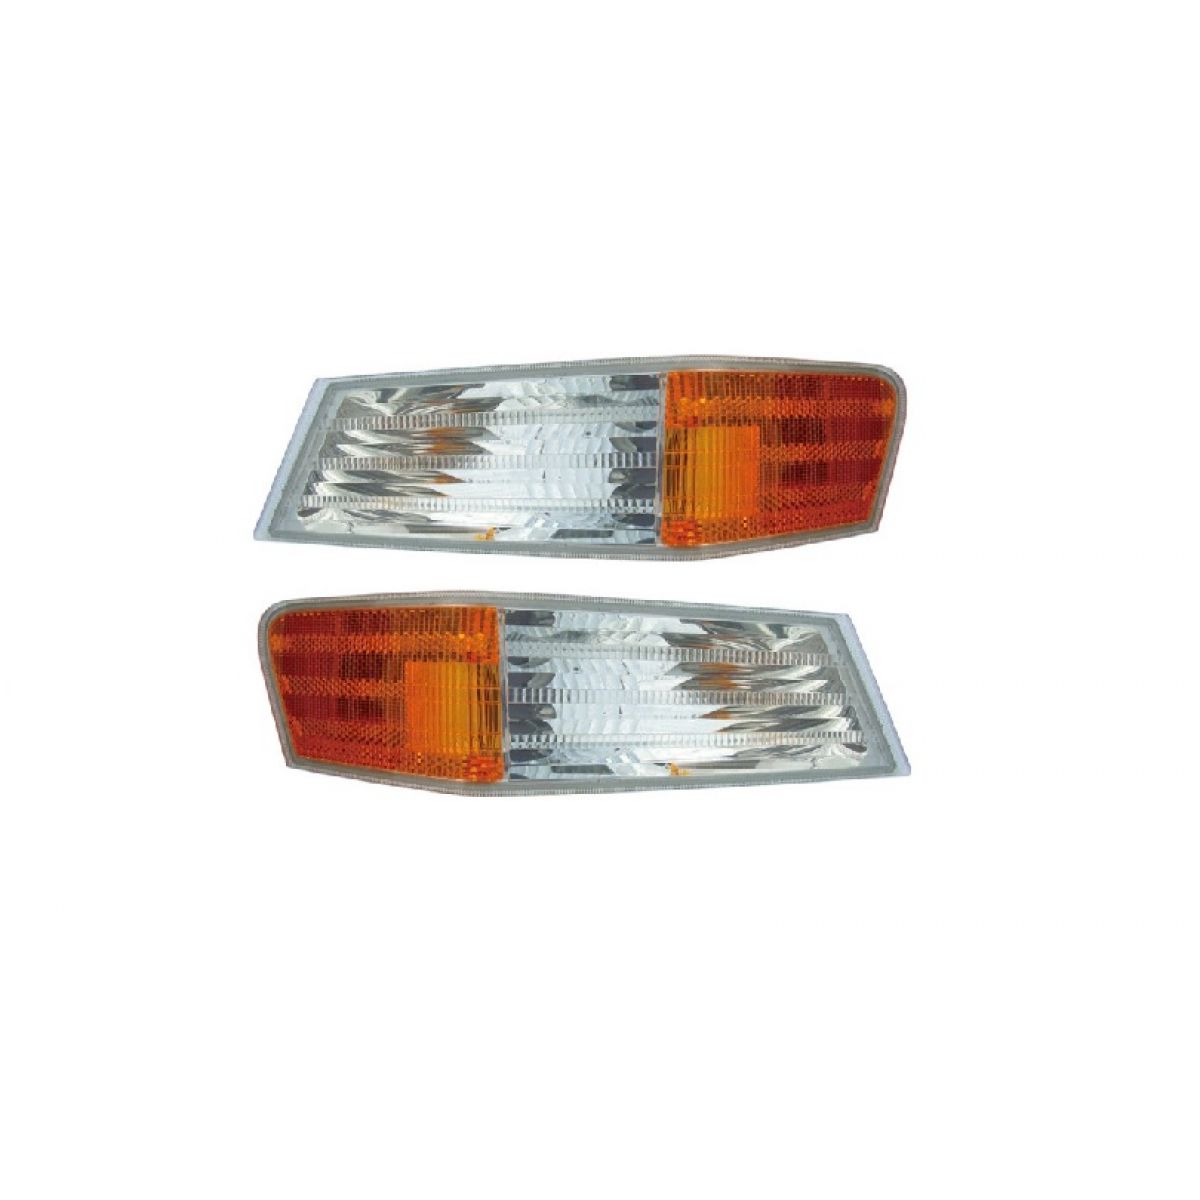 Parking Light Turn Signal Directional Lamp Front Pair Set for 07-14 Jeep Patriot | eBay 2008 Jeep Patriot Front Turn Signal Bulb